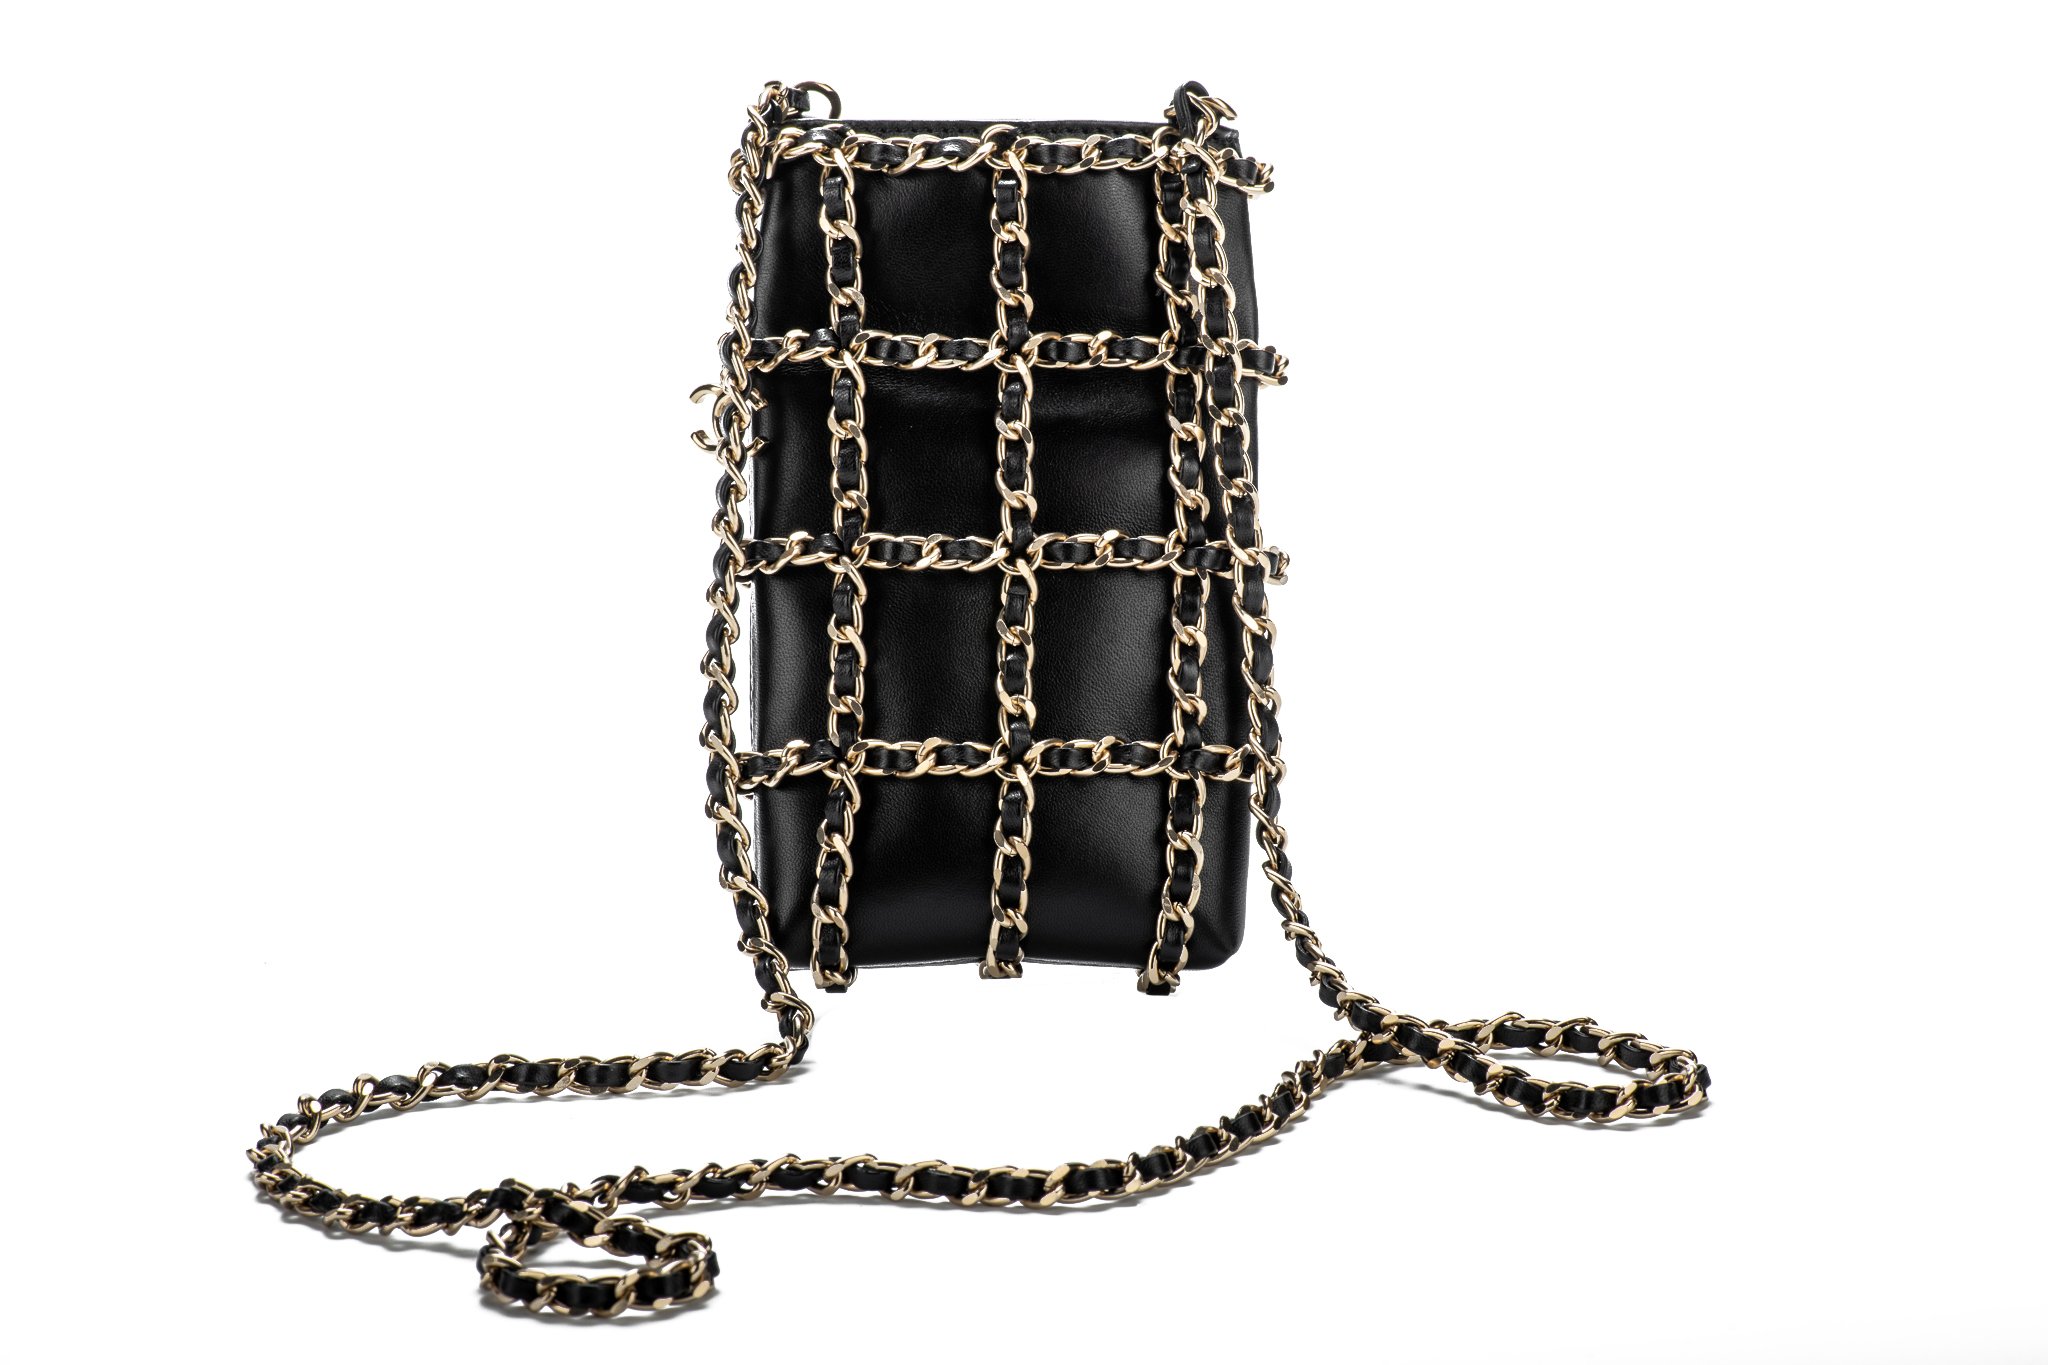 Chanel Chanel phone bag buy in United States with free shipping CosmoStore